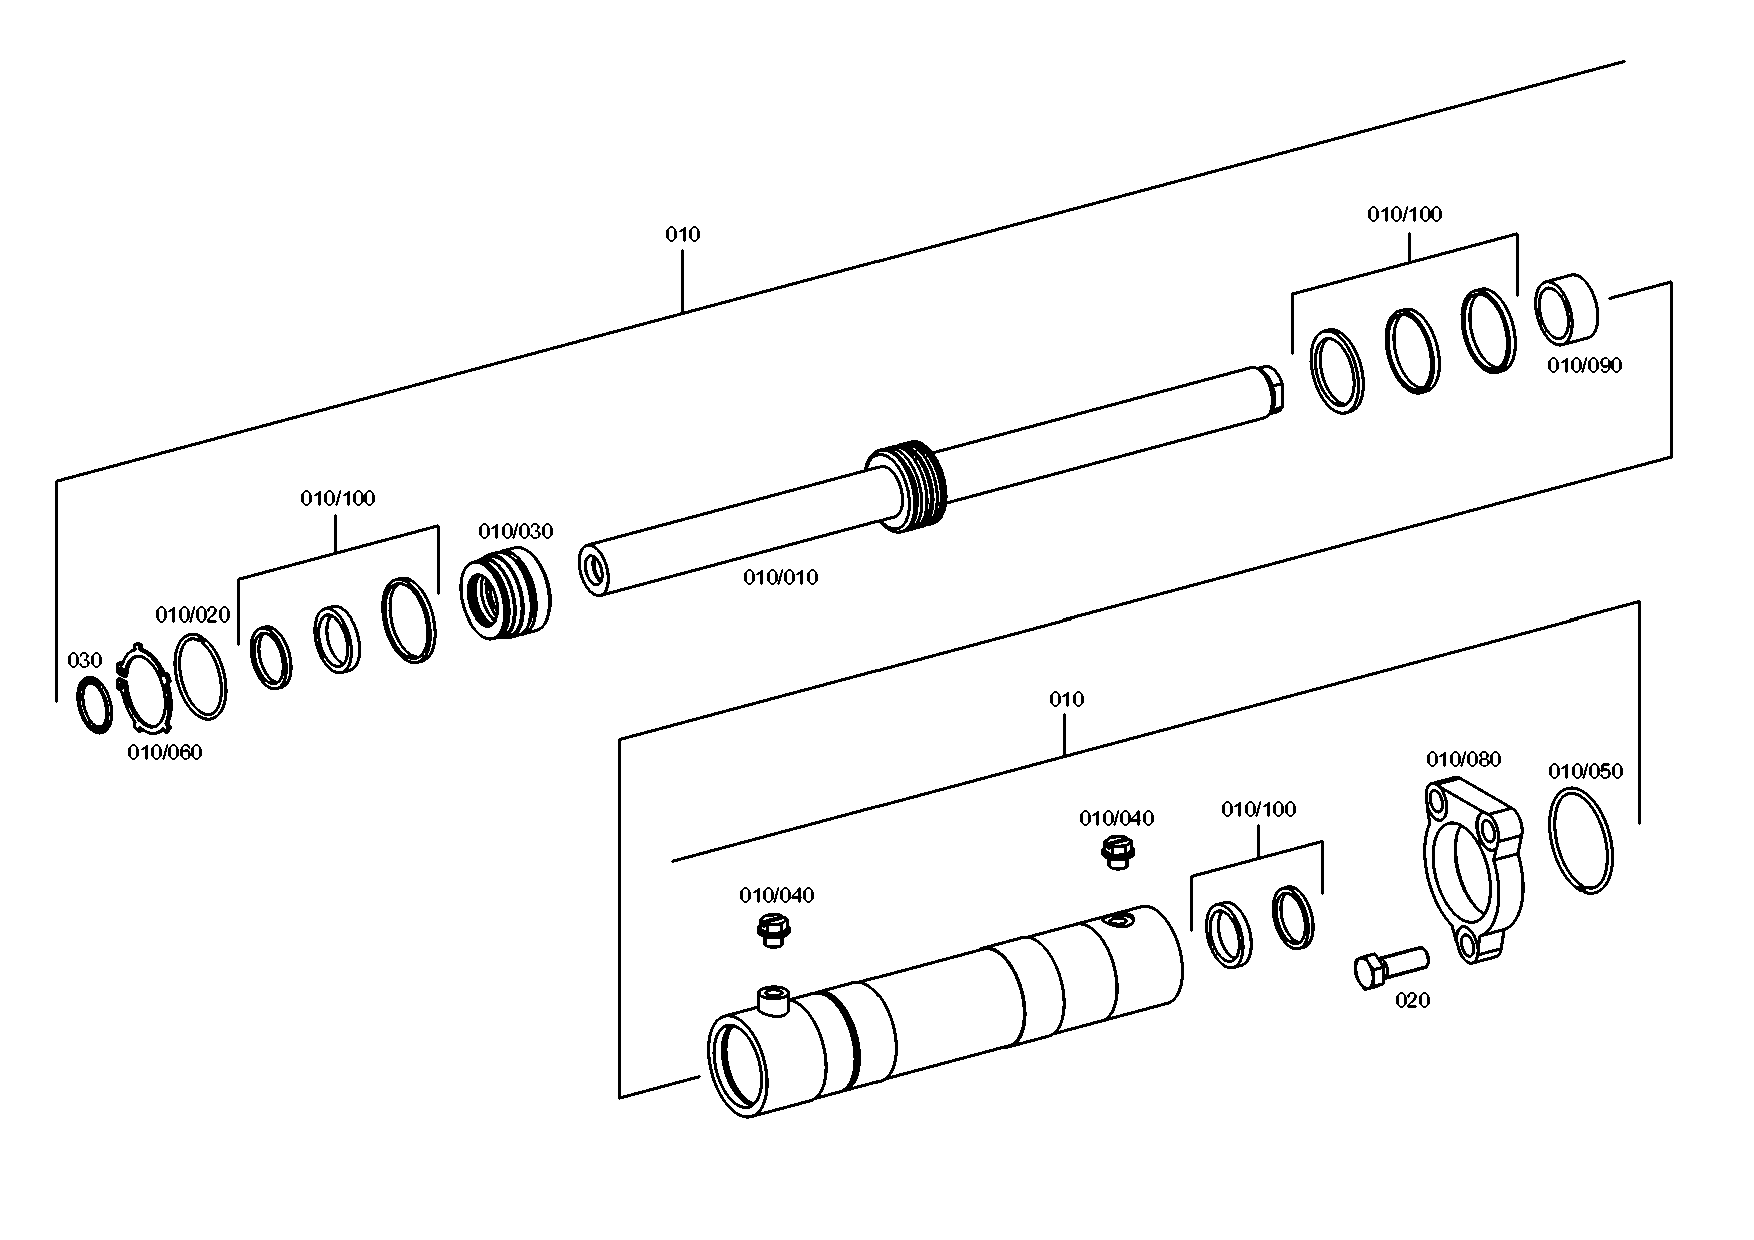 drawing for CATERPILLAR INC. 482-6752 - STEERING CYLINDER (figure 1)